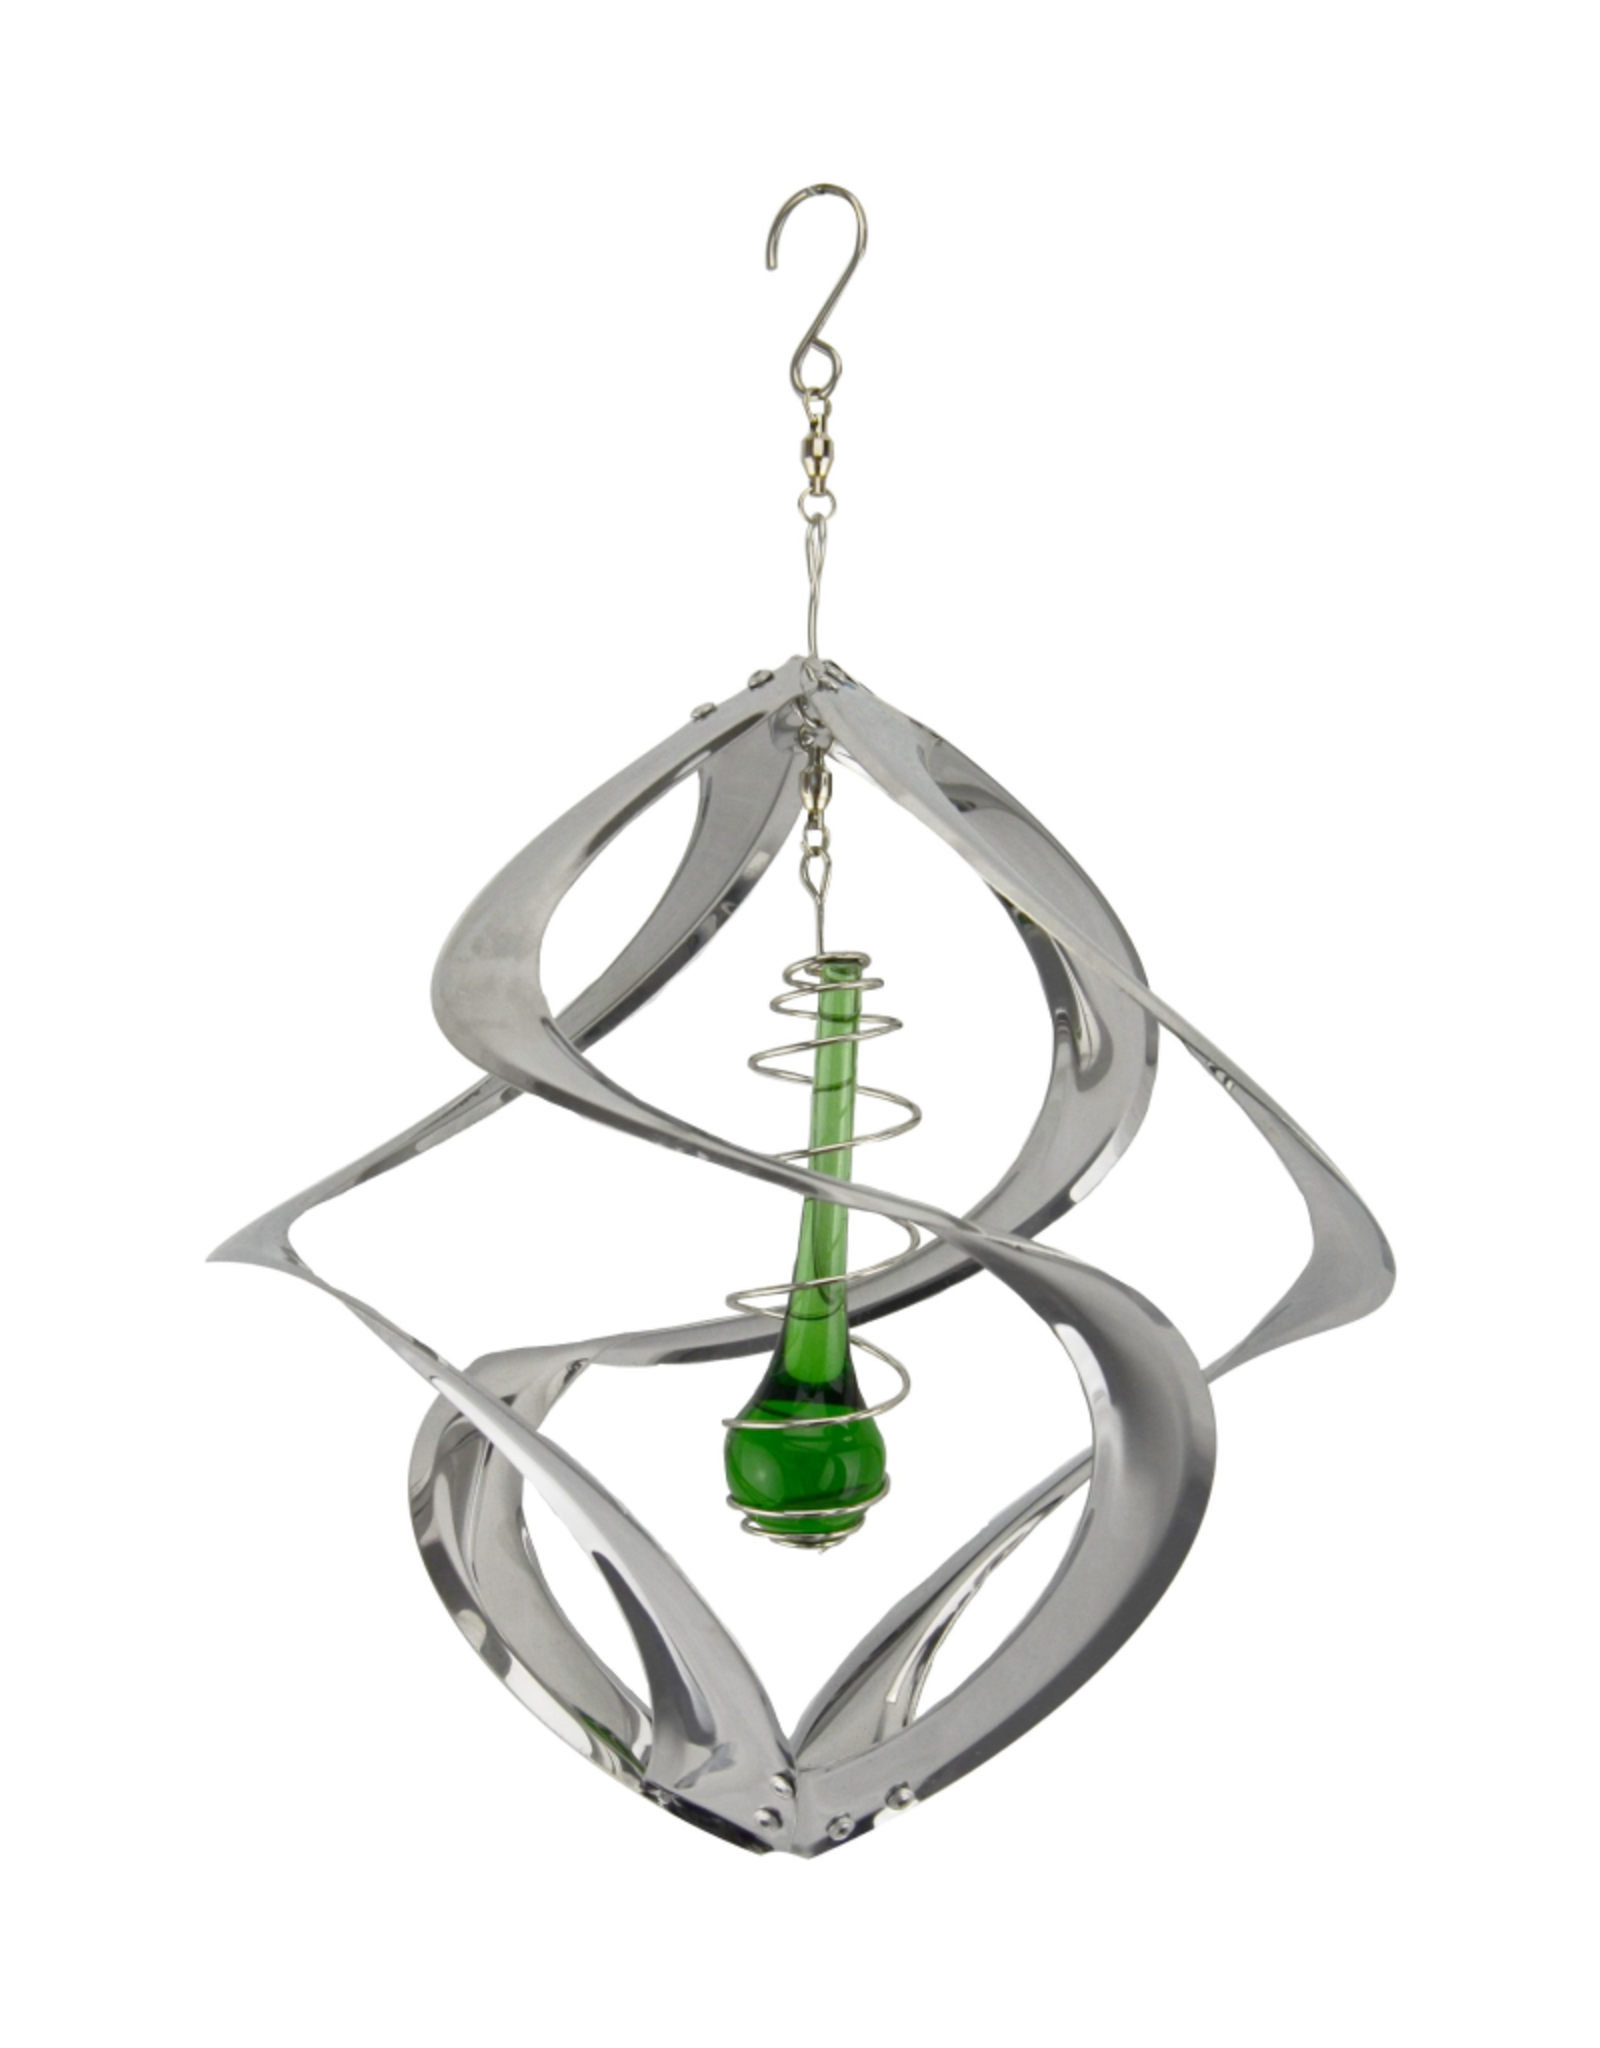 Bear Den Helix Hanging Helix - 11 Inch Chrome with Teardrop